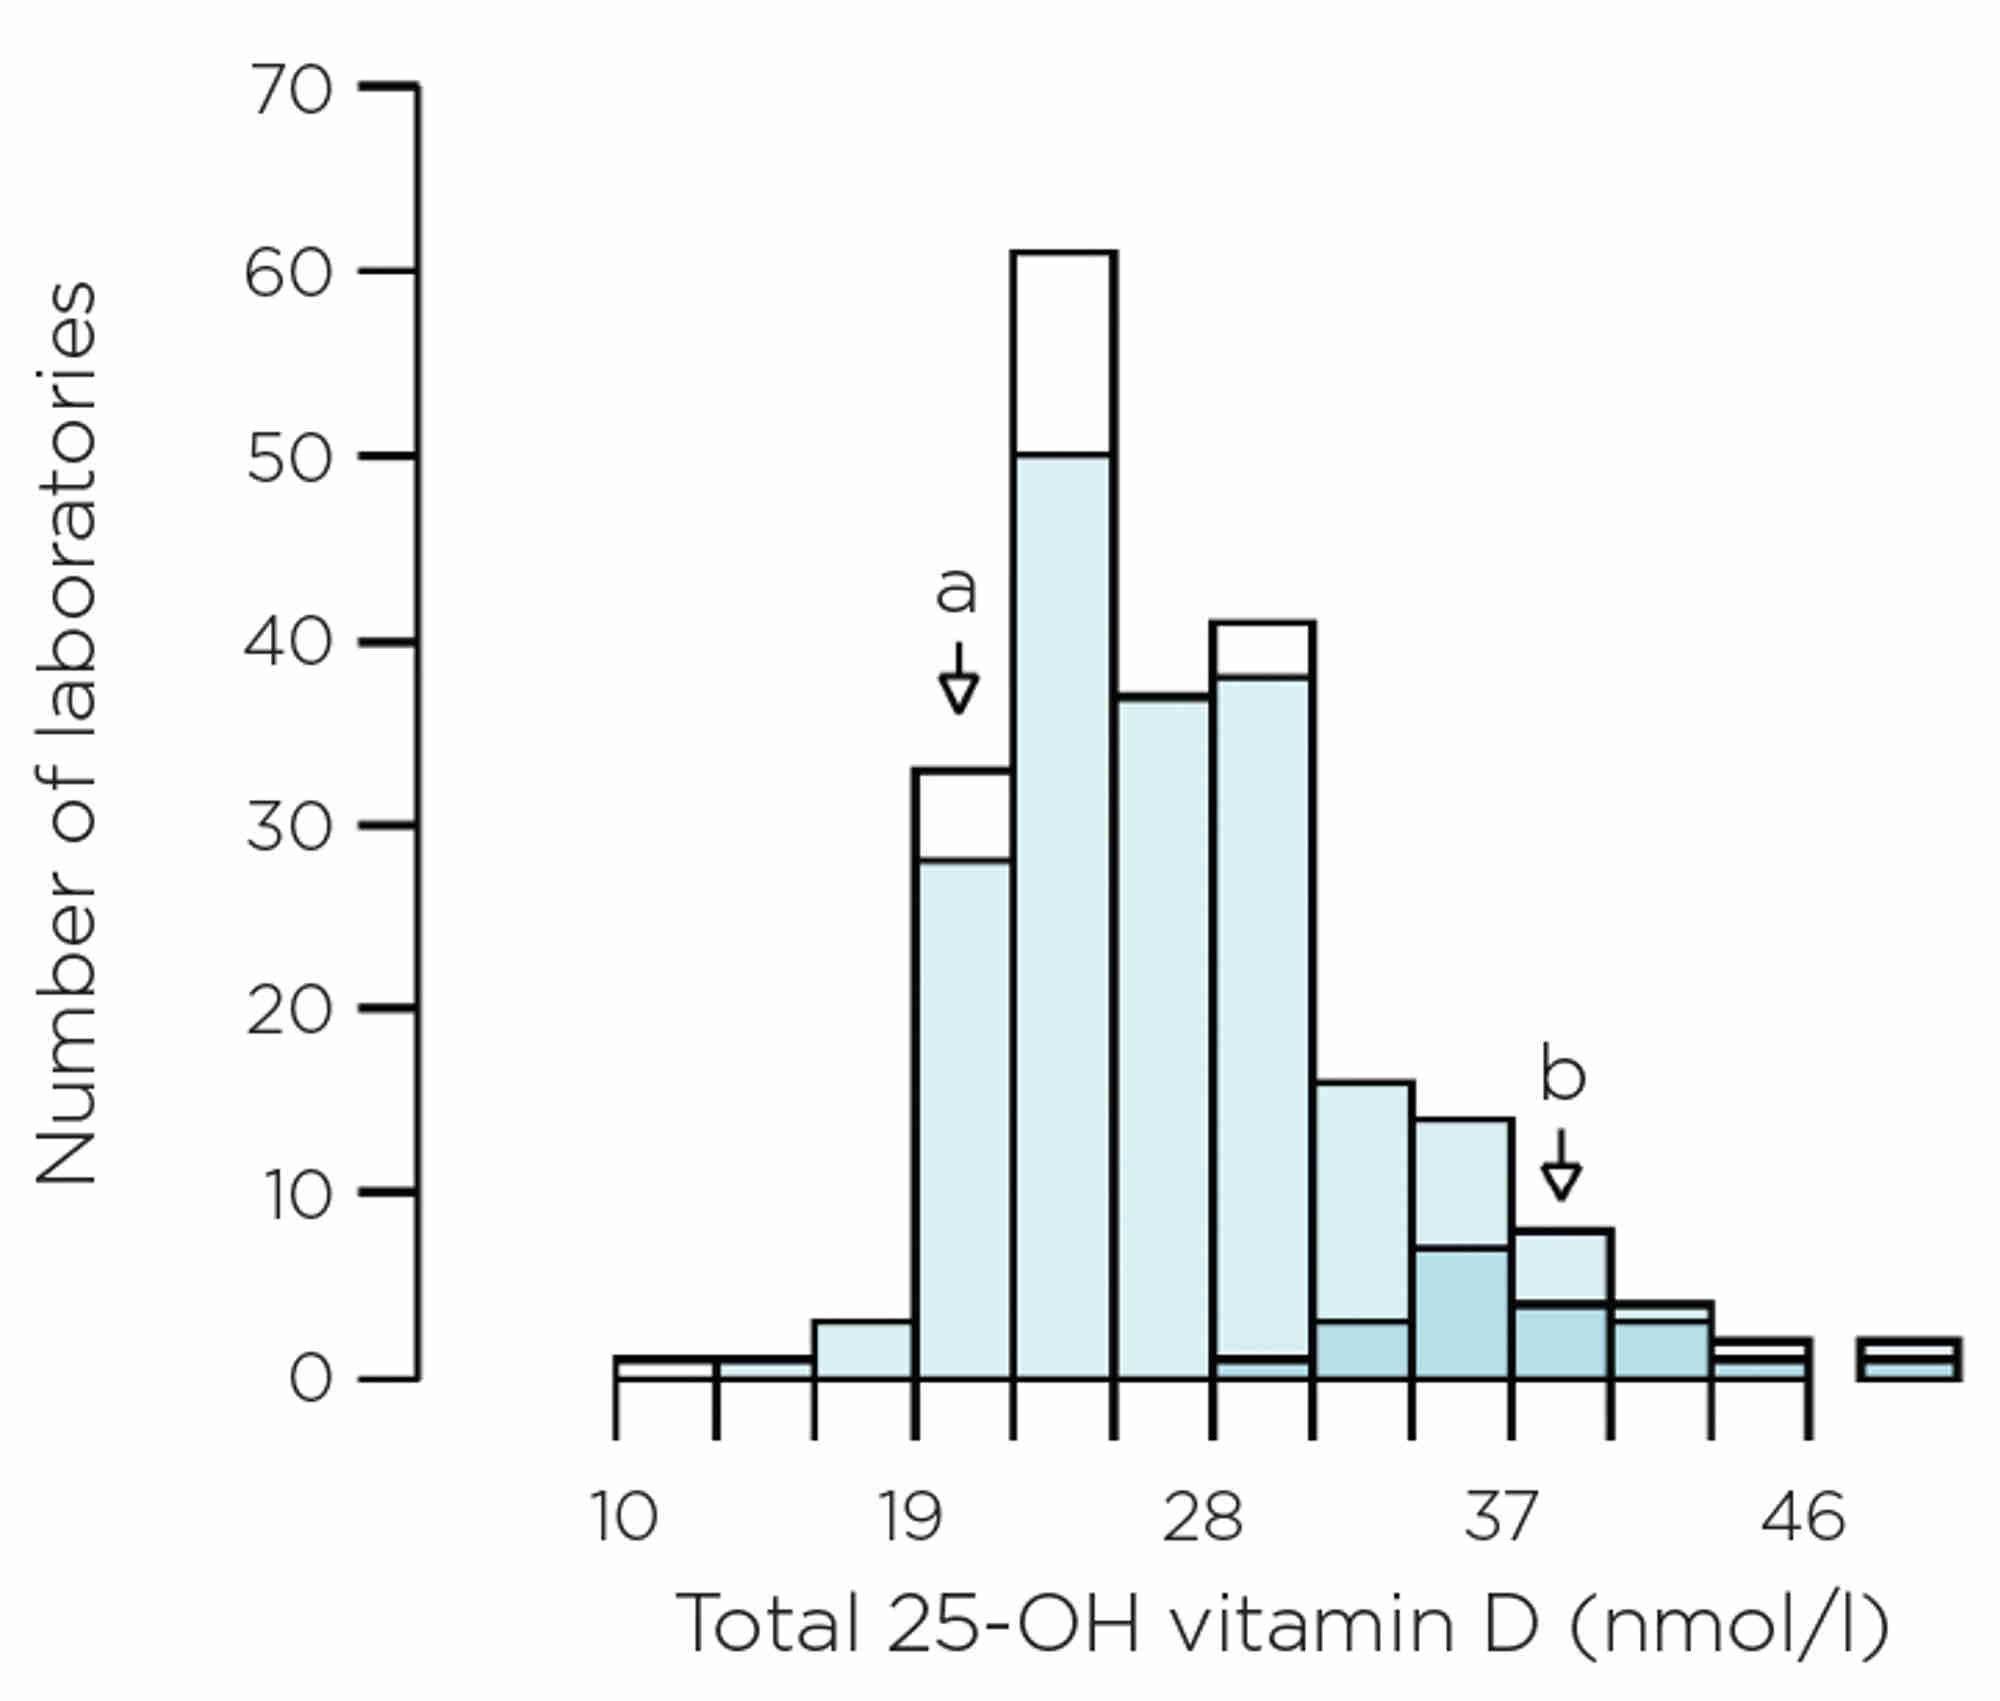 Figure 4. EQA data on pooled human serum. The histogram shows all data, but darker blue sections relate to the Siemens Atellica, light blue sections are all immunoassays, and the white sections are mass spectrometry. The reference method total vitamin D value of 22.8nmol/l is shown by arrow a and the method mean for Siemens Atellica is shown by arrow b.